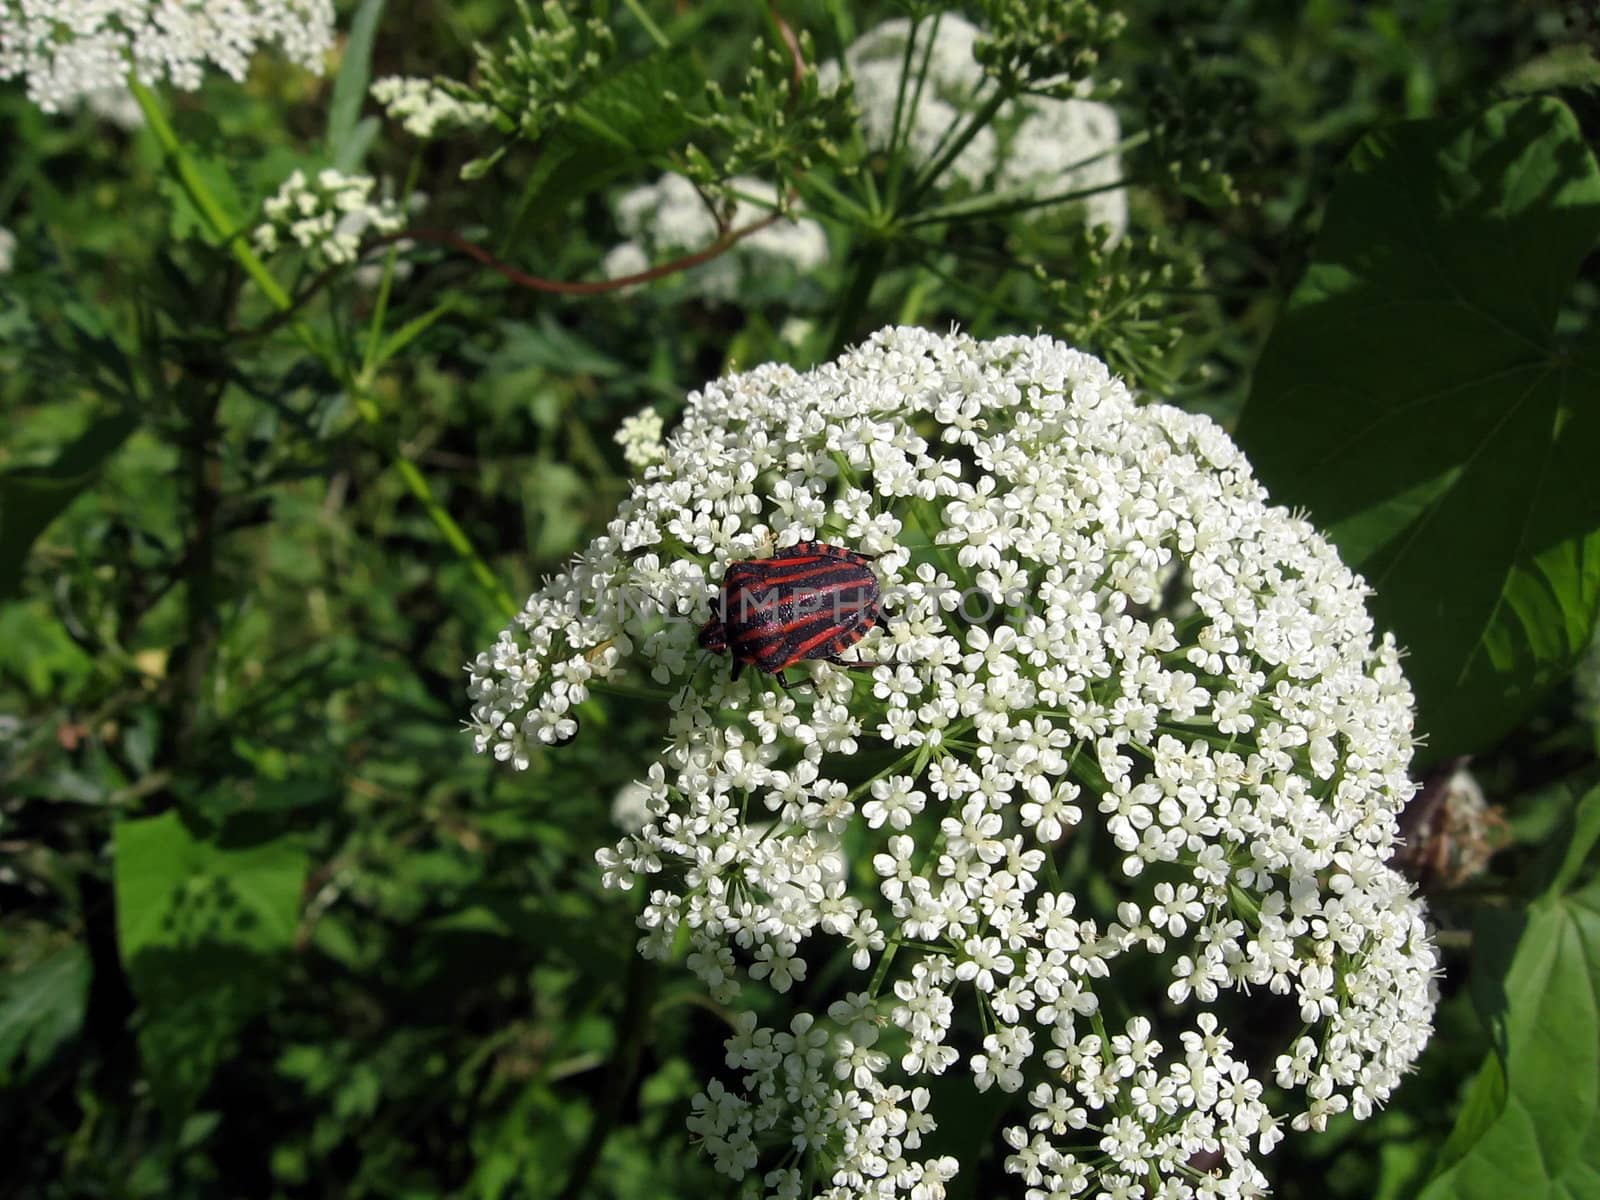 Motley red bug sits on the white flowers